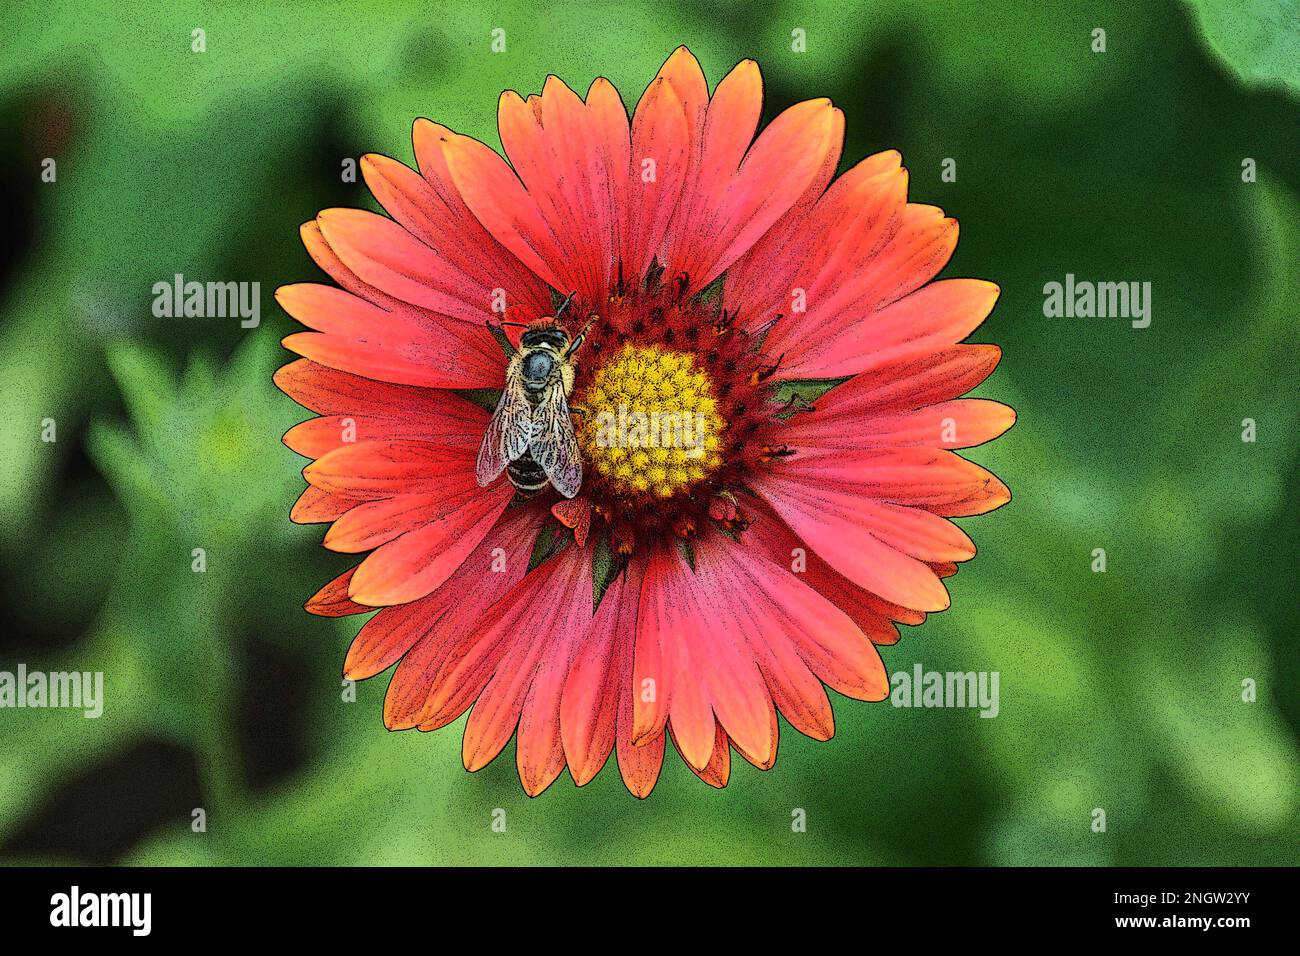 Bee on the flower in the summer garden illustration. Pollination concept. Stock Photo